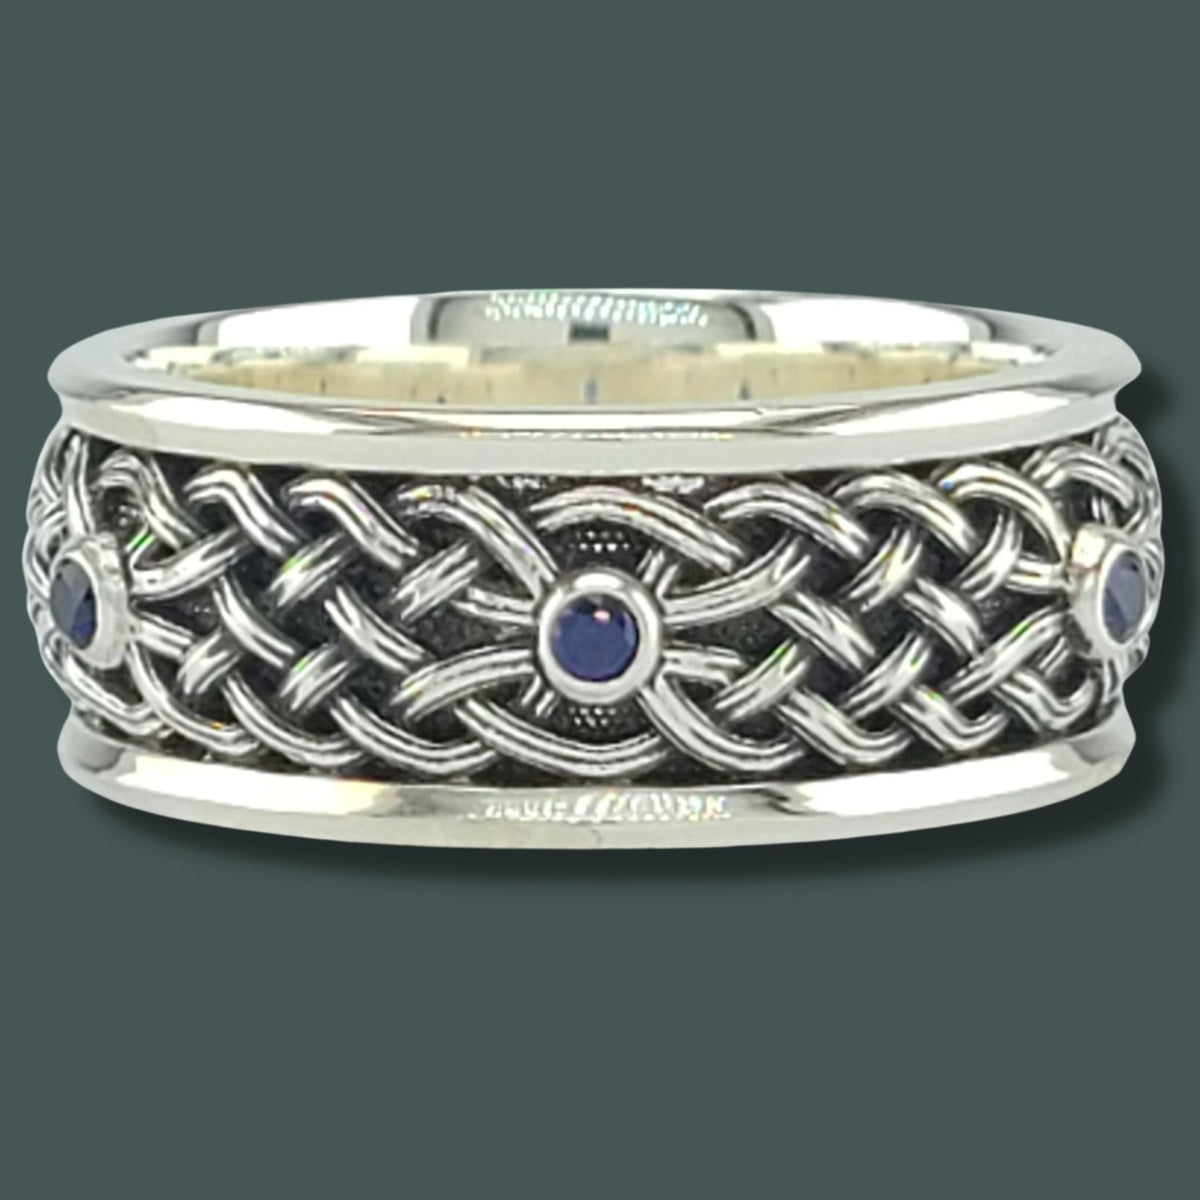 ERROL SOLITAIRE Band Ring in GOLD with CHOICE OF Six 3mm GEMSTONES - Starting at $1049